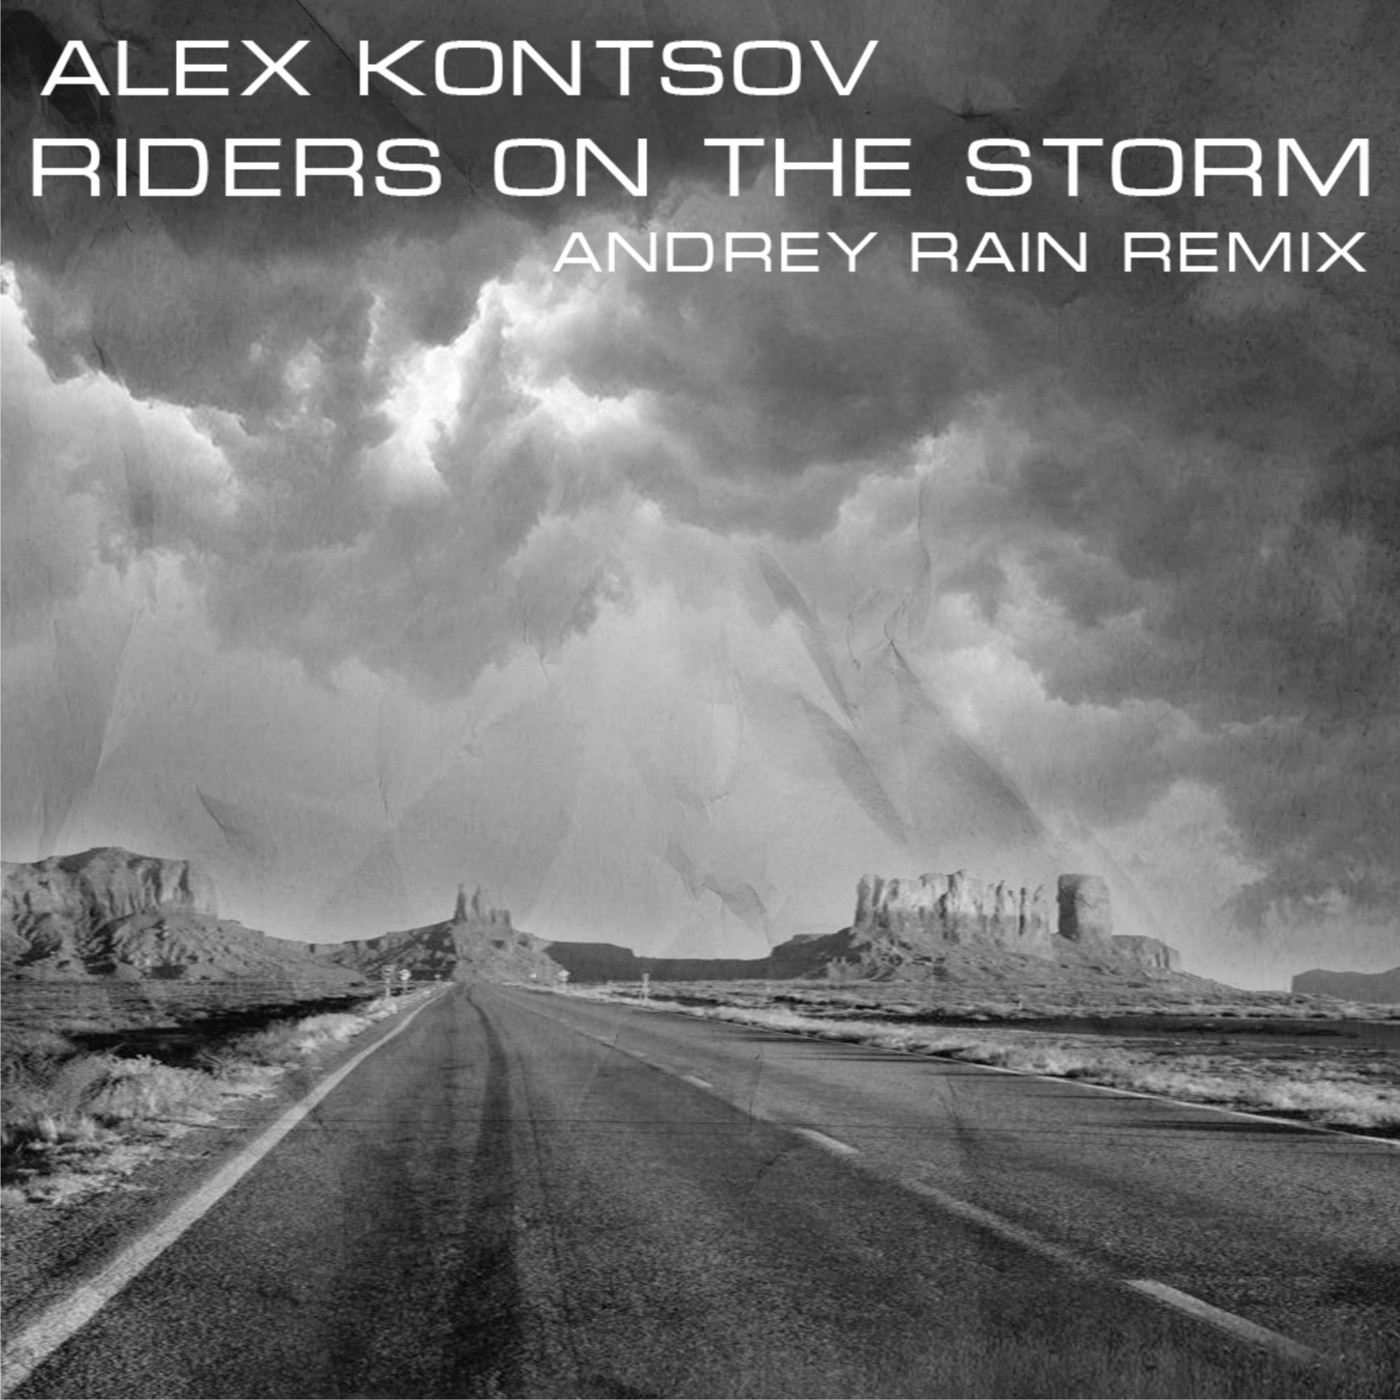 Riders on the Storm. The Rain Remix. Alex kontsov Riders on the Storm FUZZDEAD Remix. Alex kontsov - Red Dust (feat. Isentie) альбом.